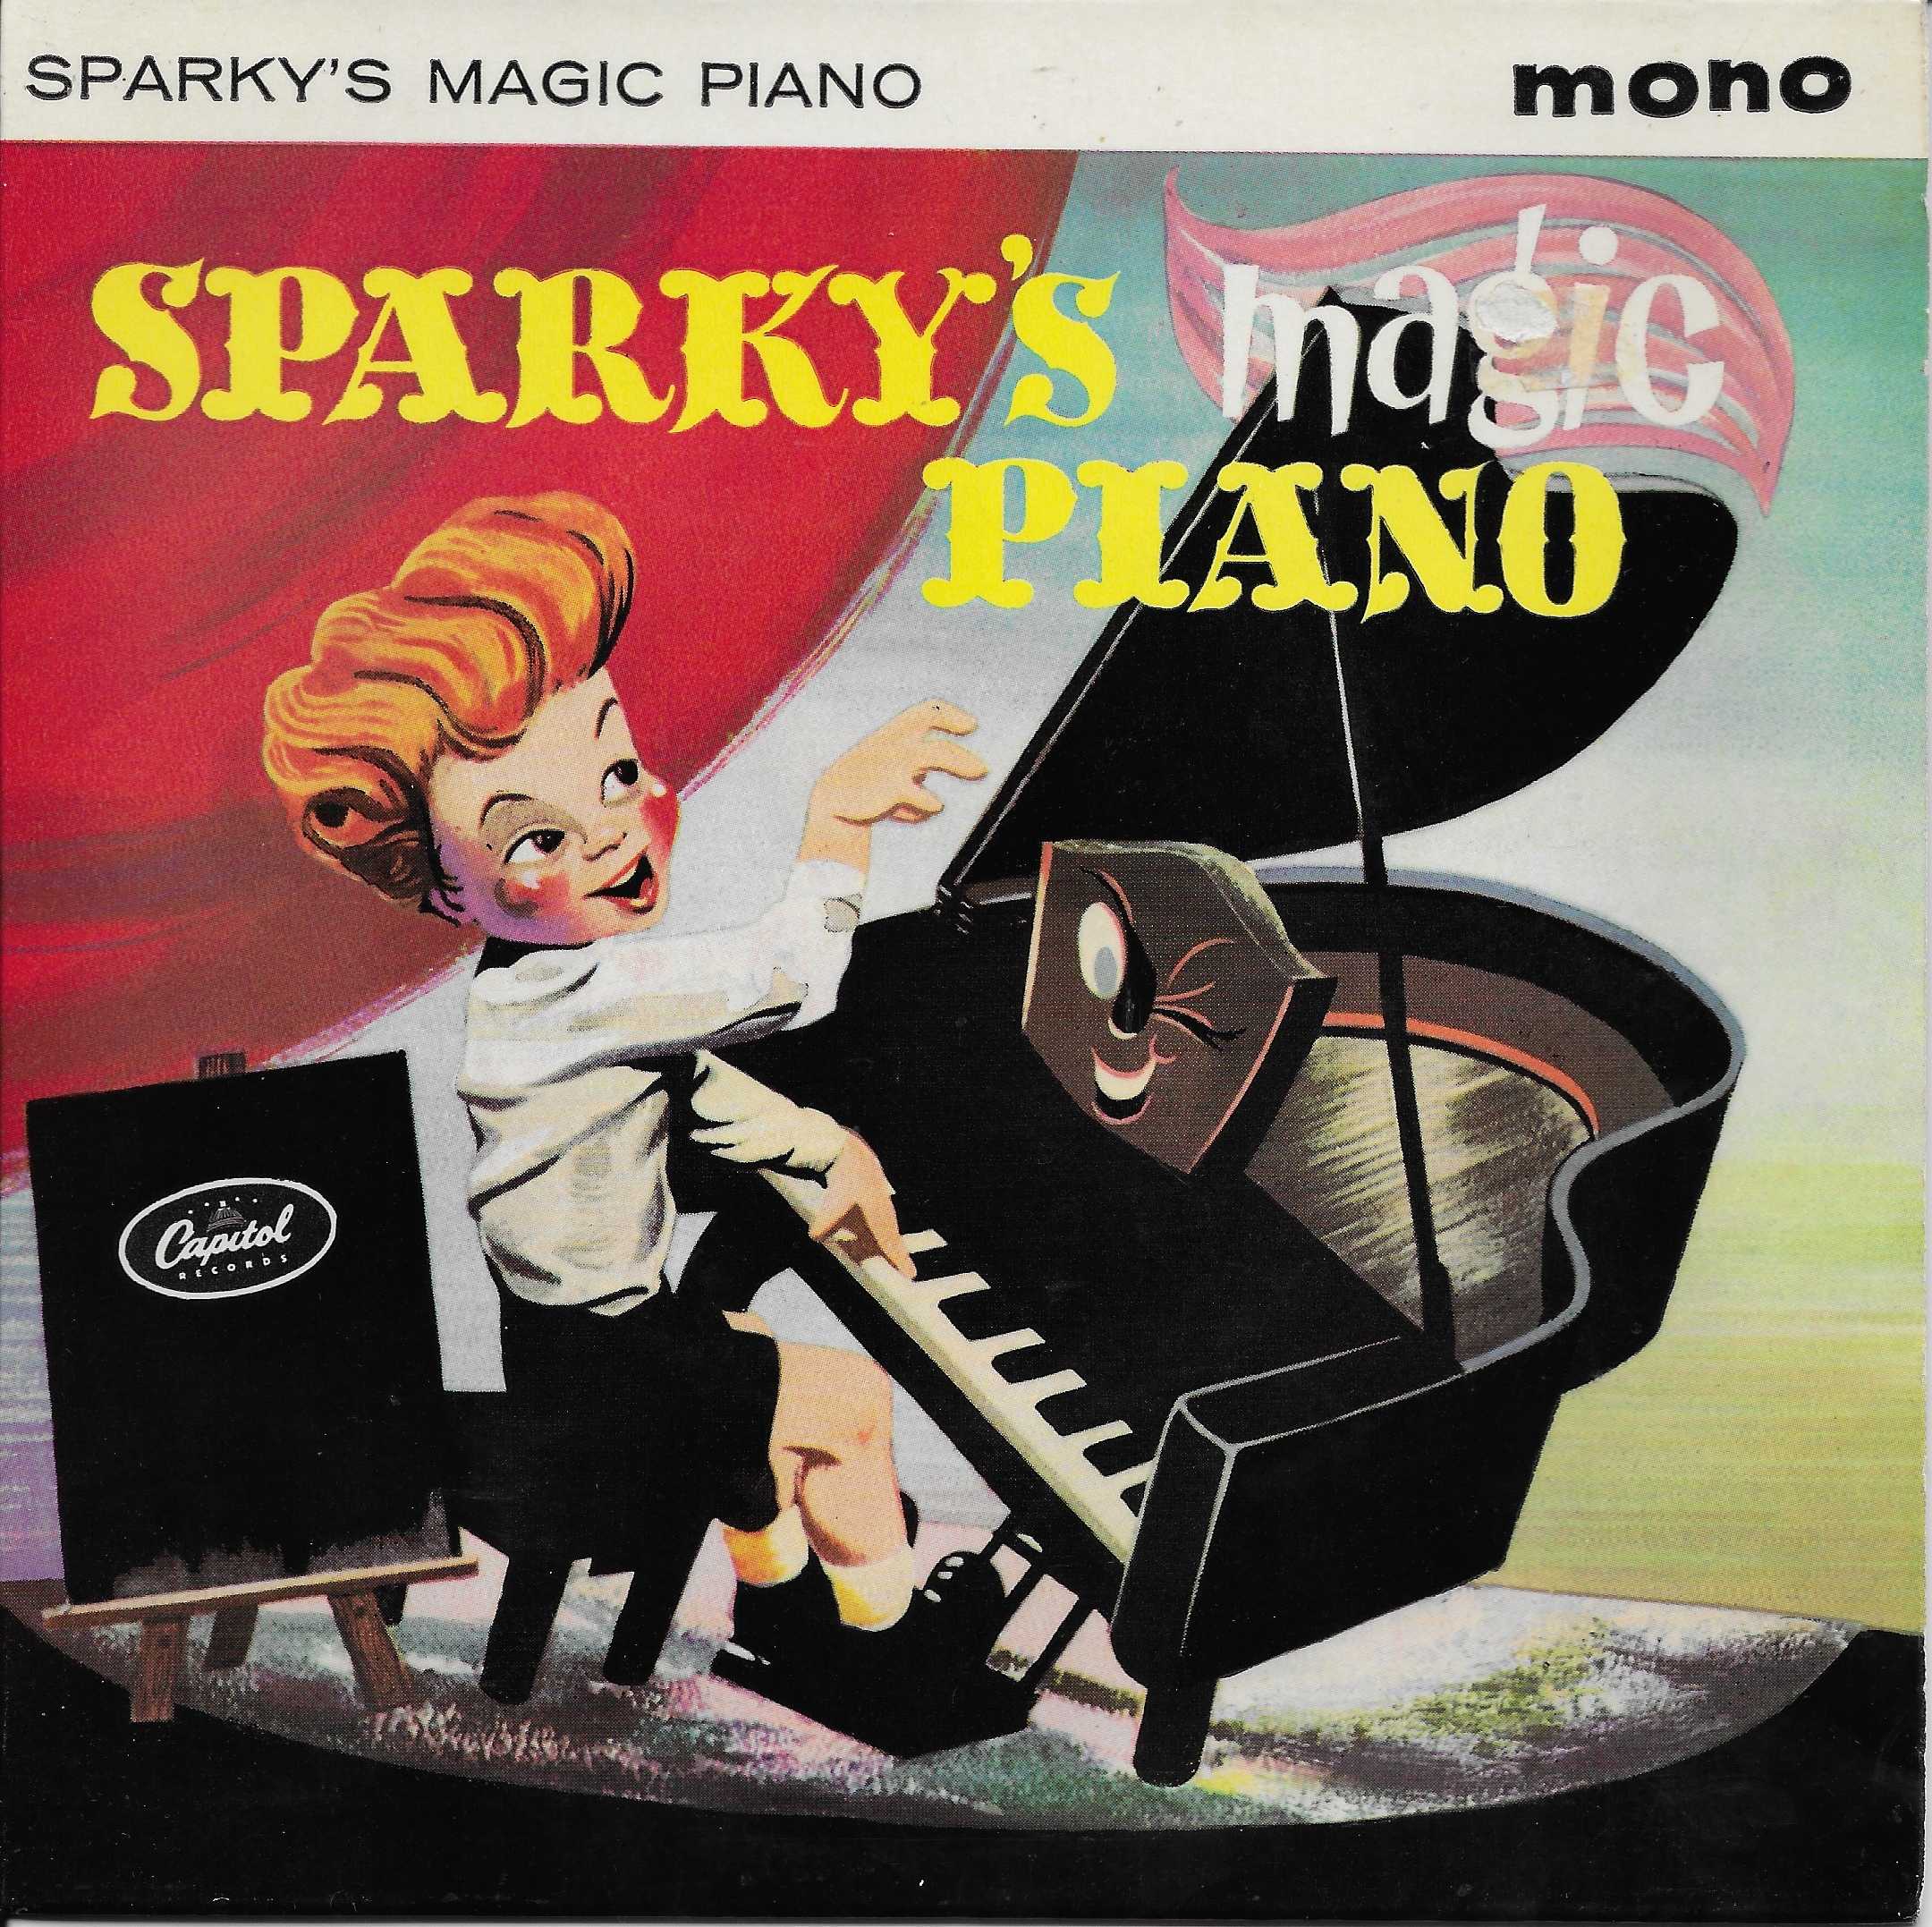 Picture of Sparky's magic piano by artist Billy May / Alan Liningston / Henry Blair / Ray Turner from ITV, Channel 4 and Channel 5 singles library